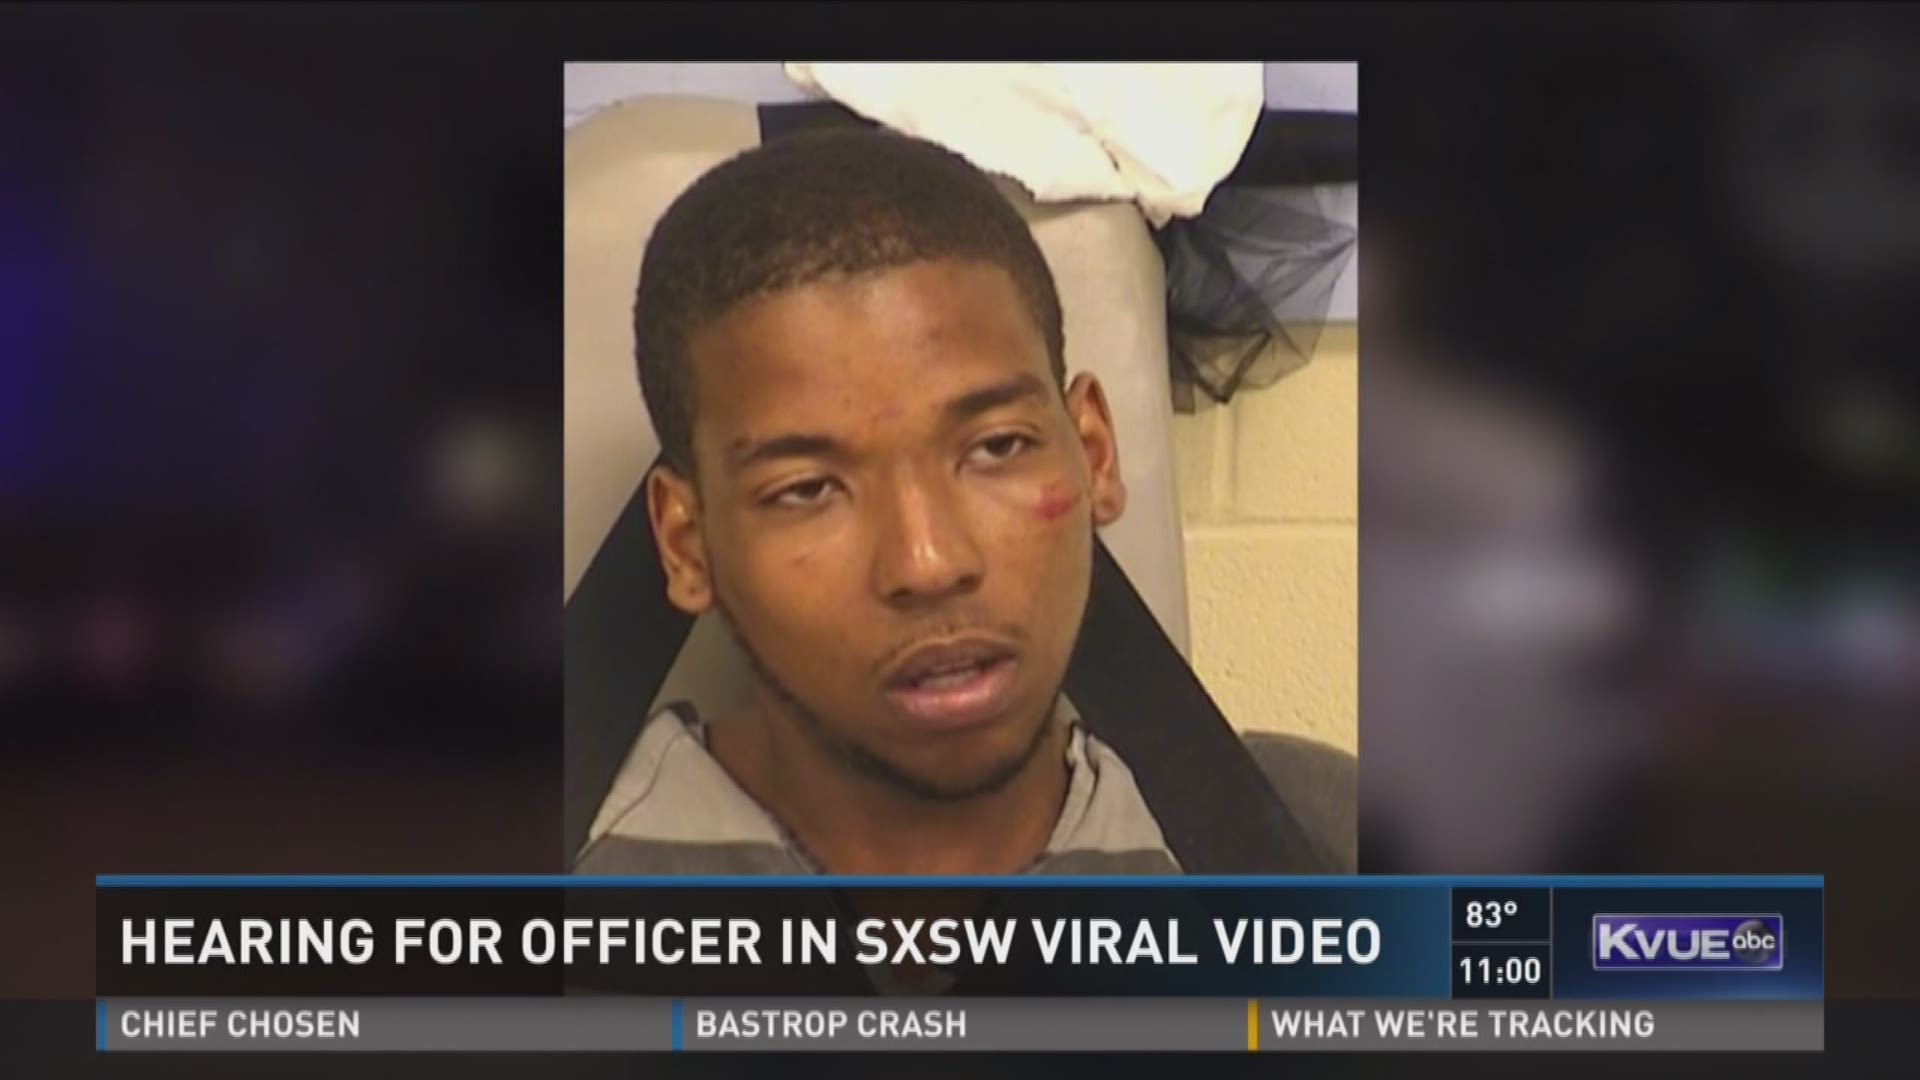 Hearing for officer in viral SXSW video